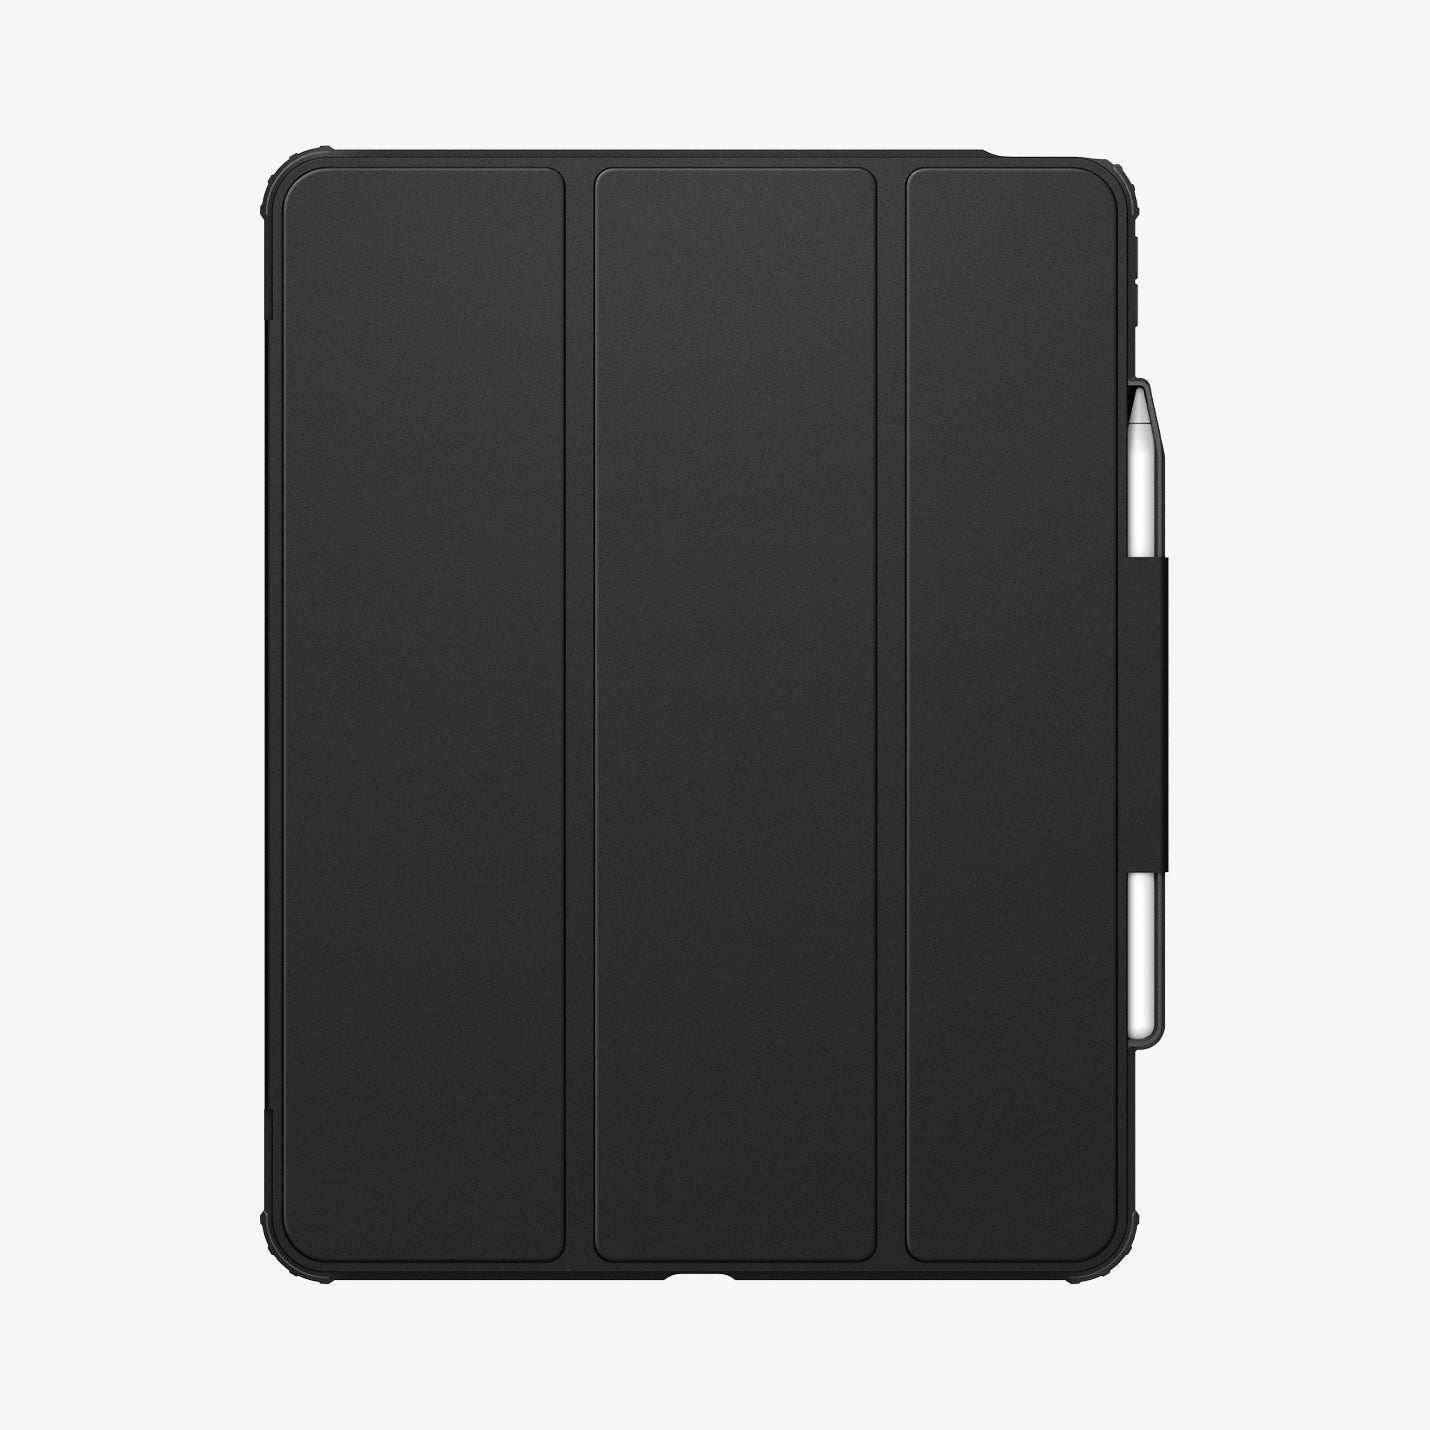 ACS07668 - iPad Air 12.9-inch Case Ultra Hybrid Pro in Black showing the front with s-pen attached